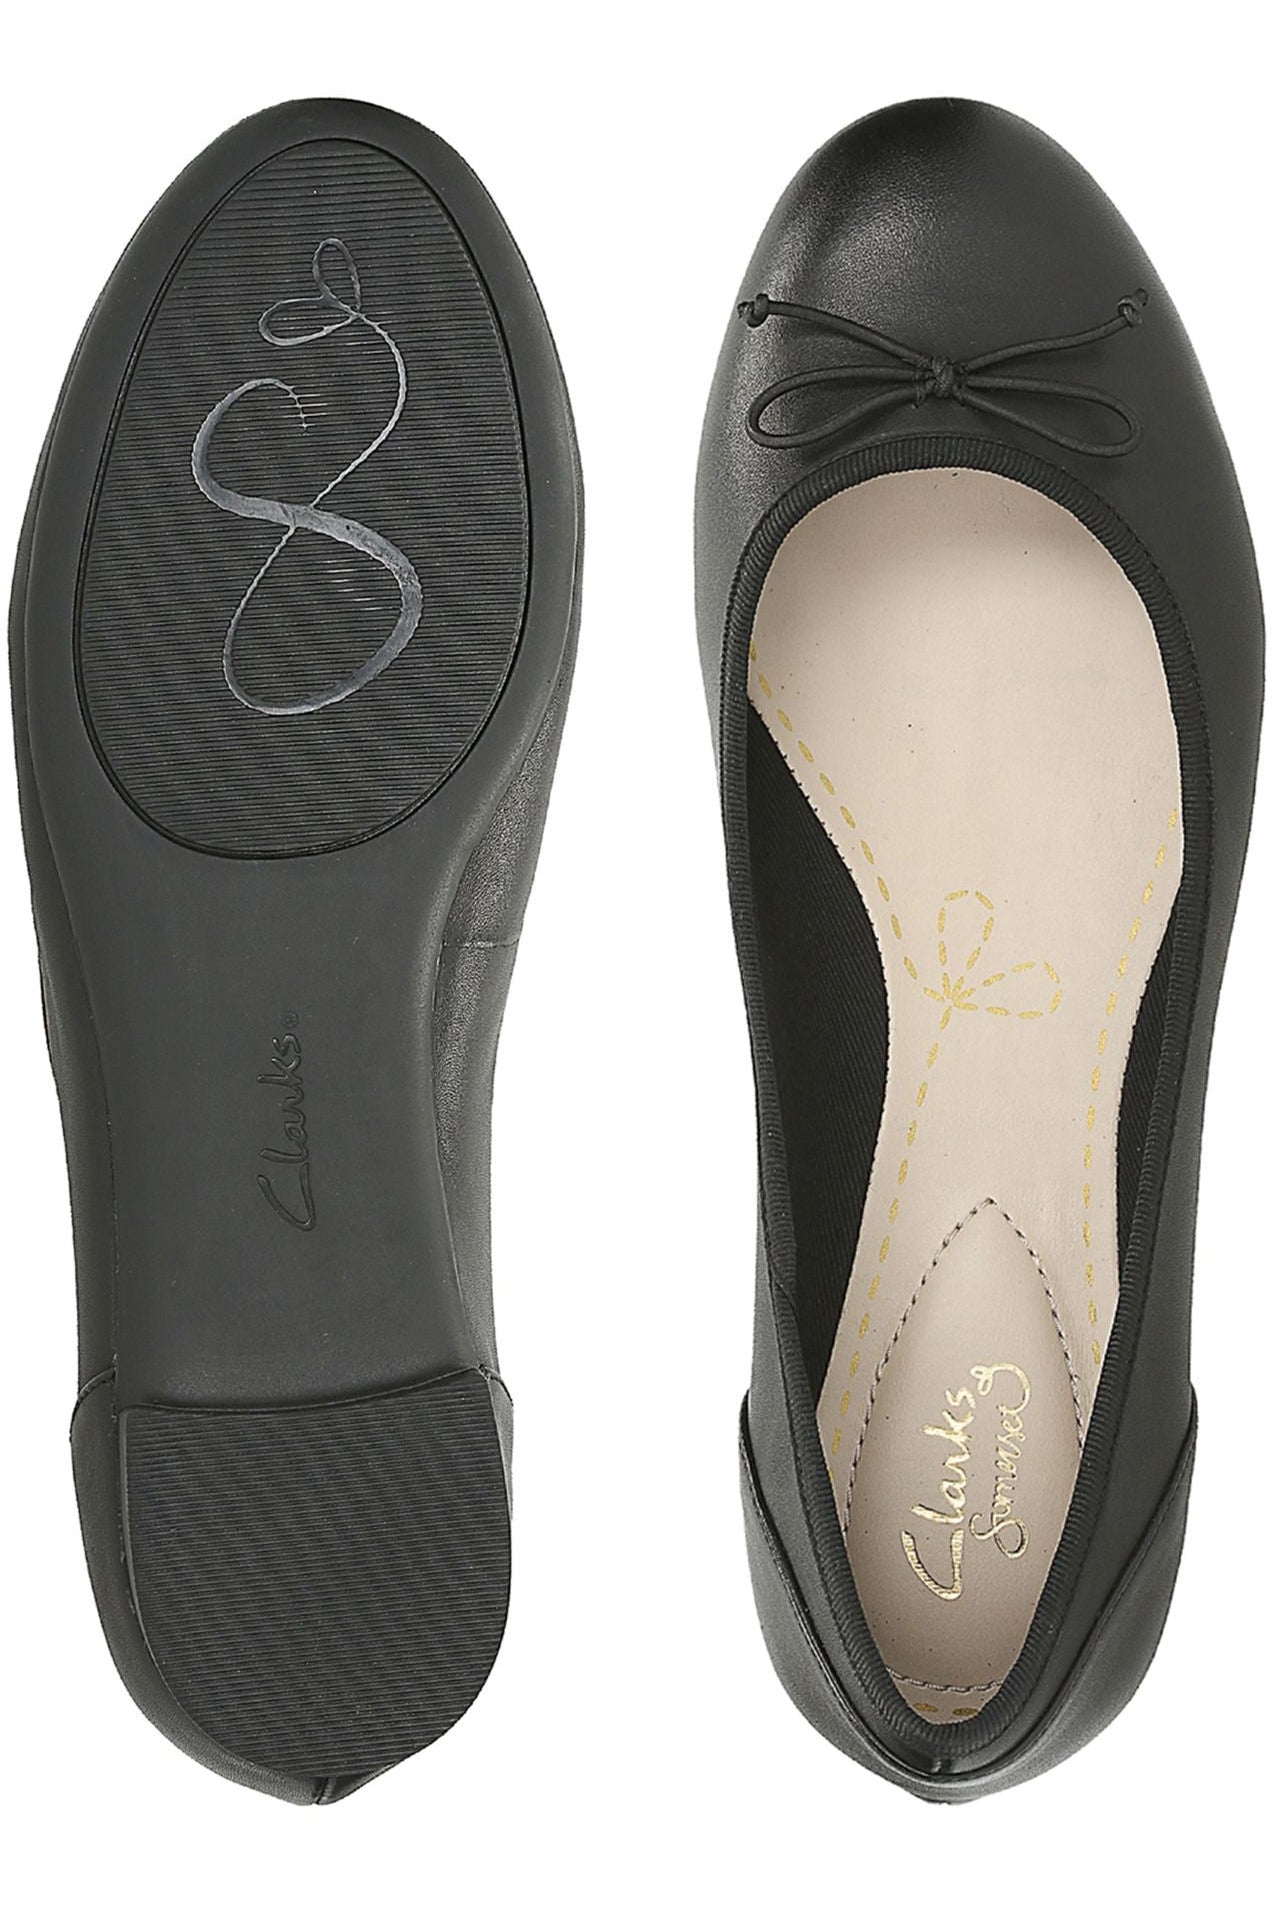 Clarks Couture Bloom black leather